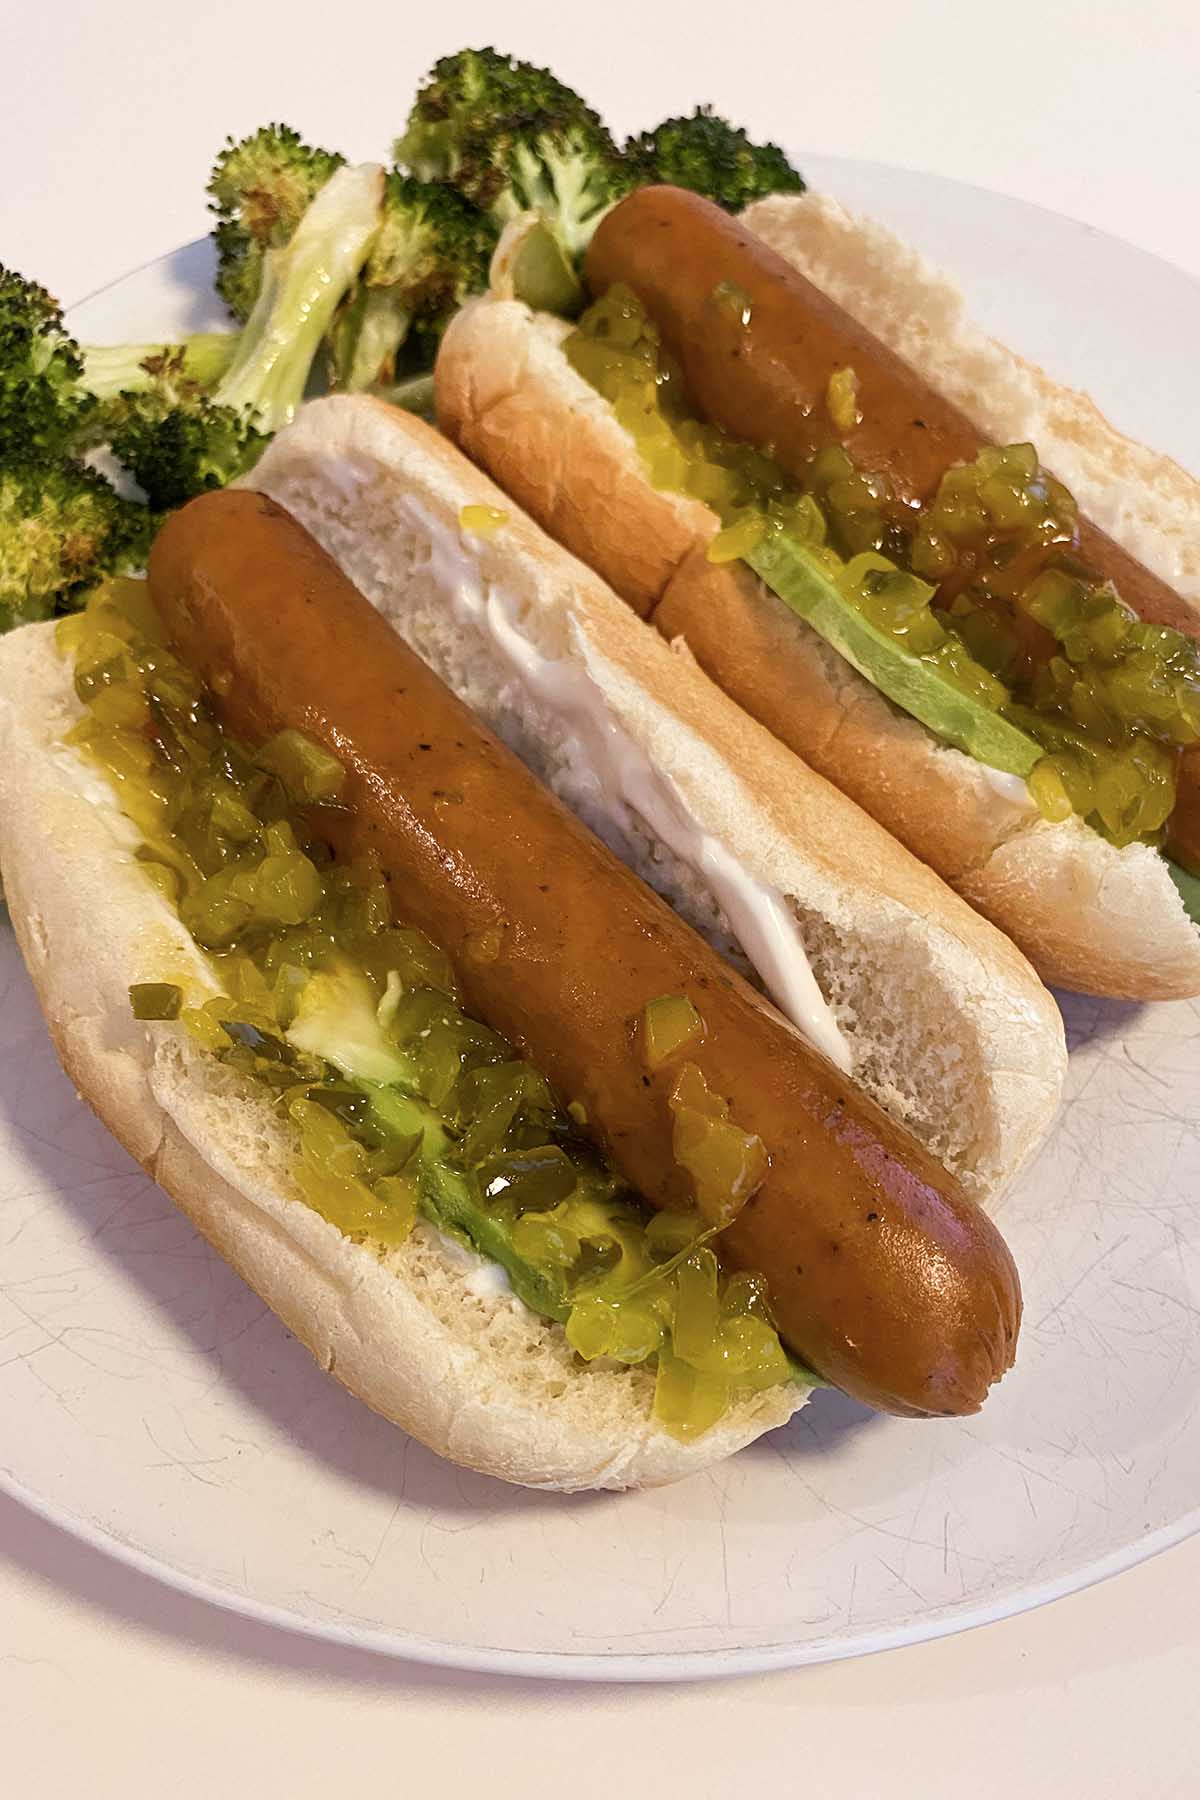 Field Roast Frankfurters on a bun with avocado, relish, and mayo with a side of roasted broccoli